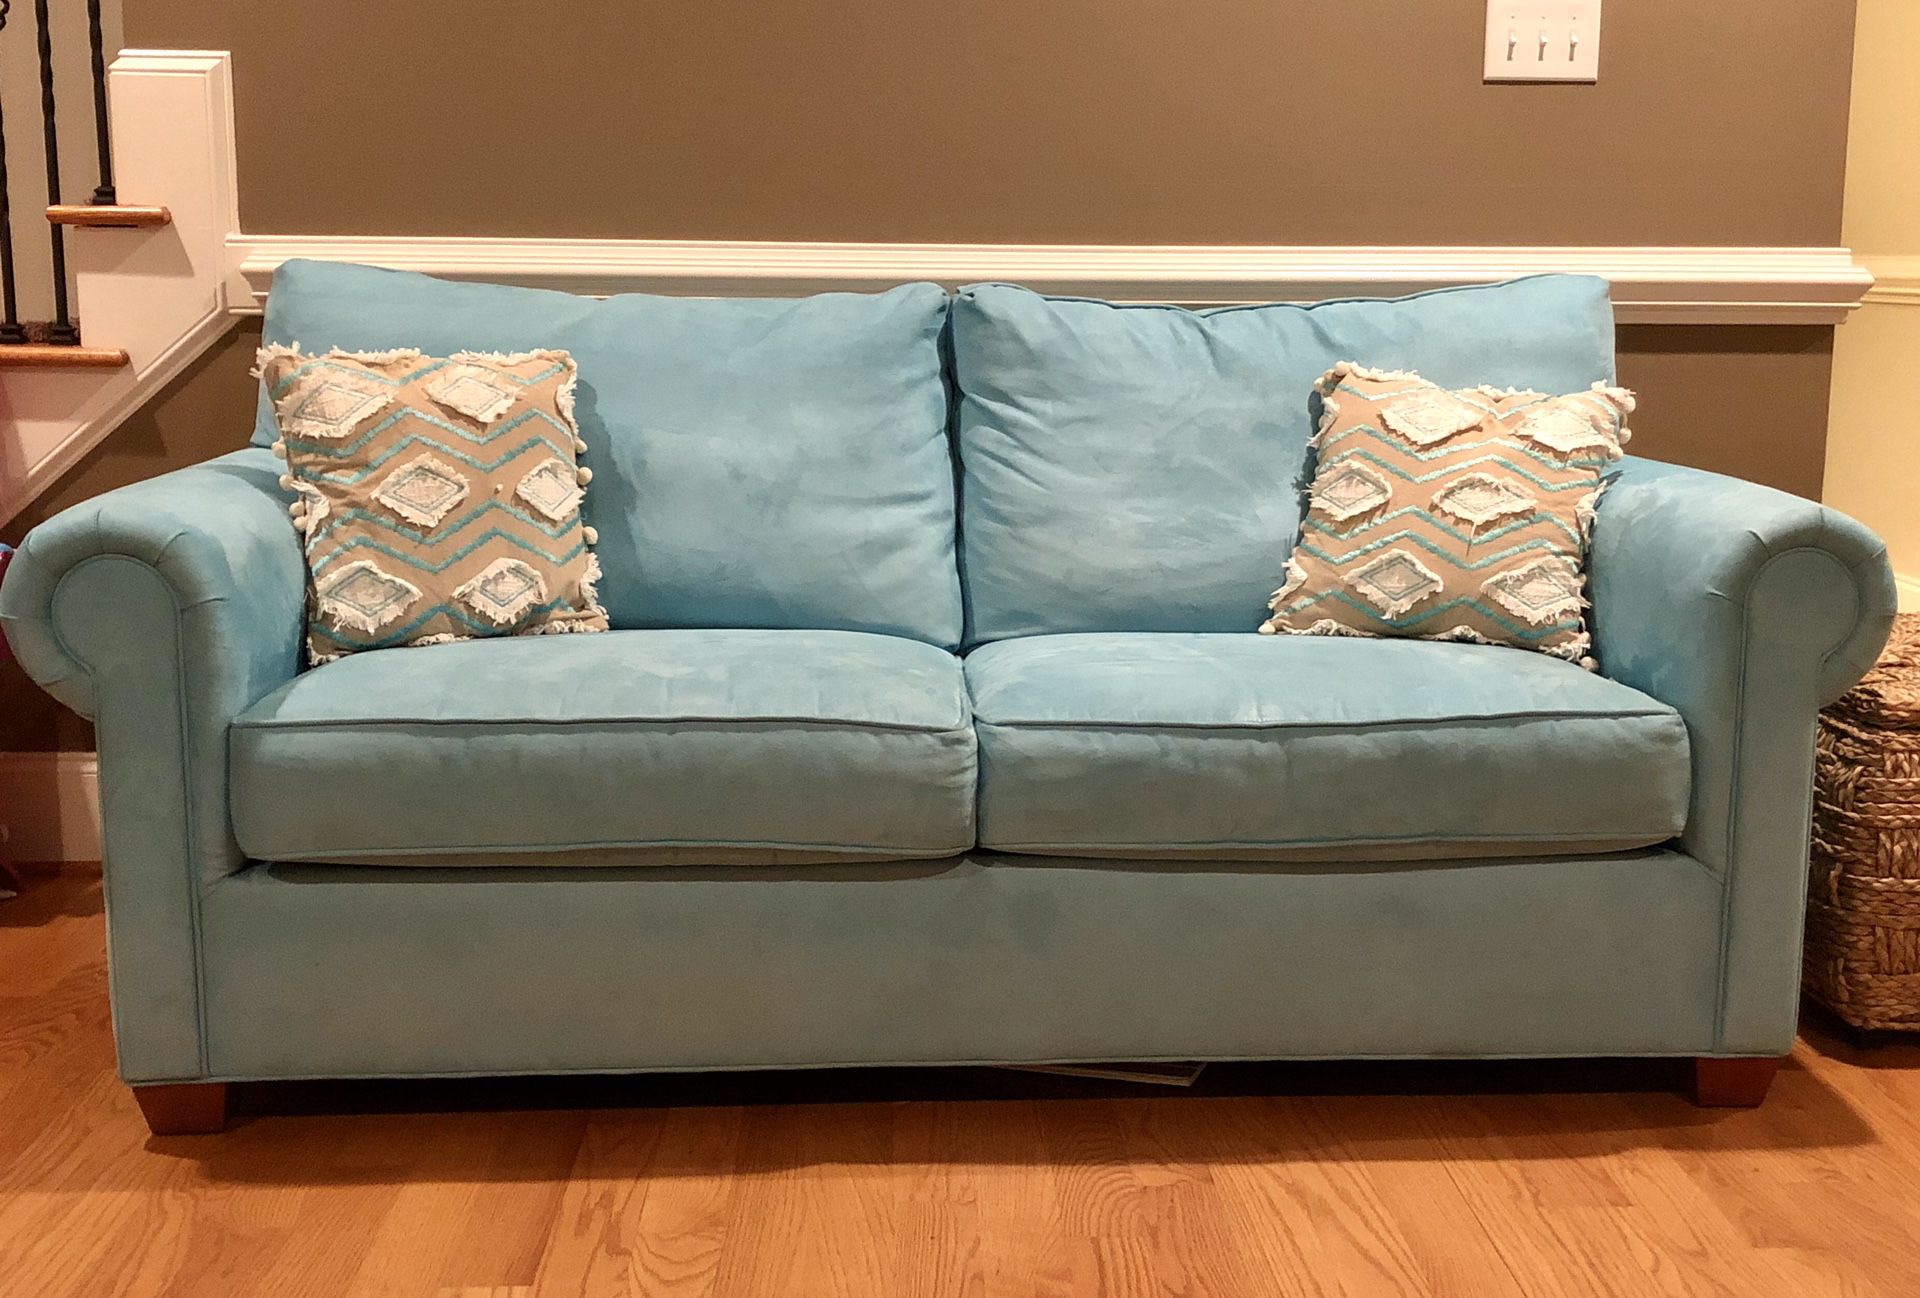 Teal blue couch